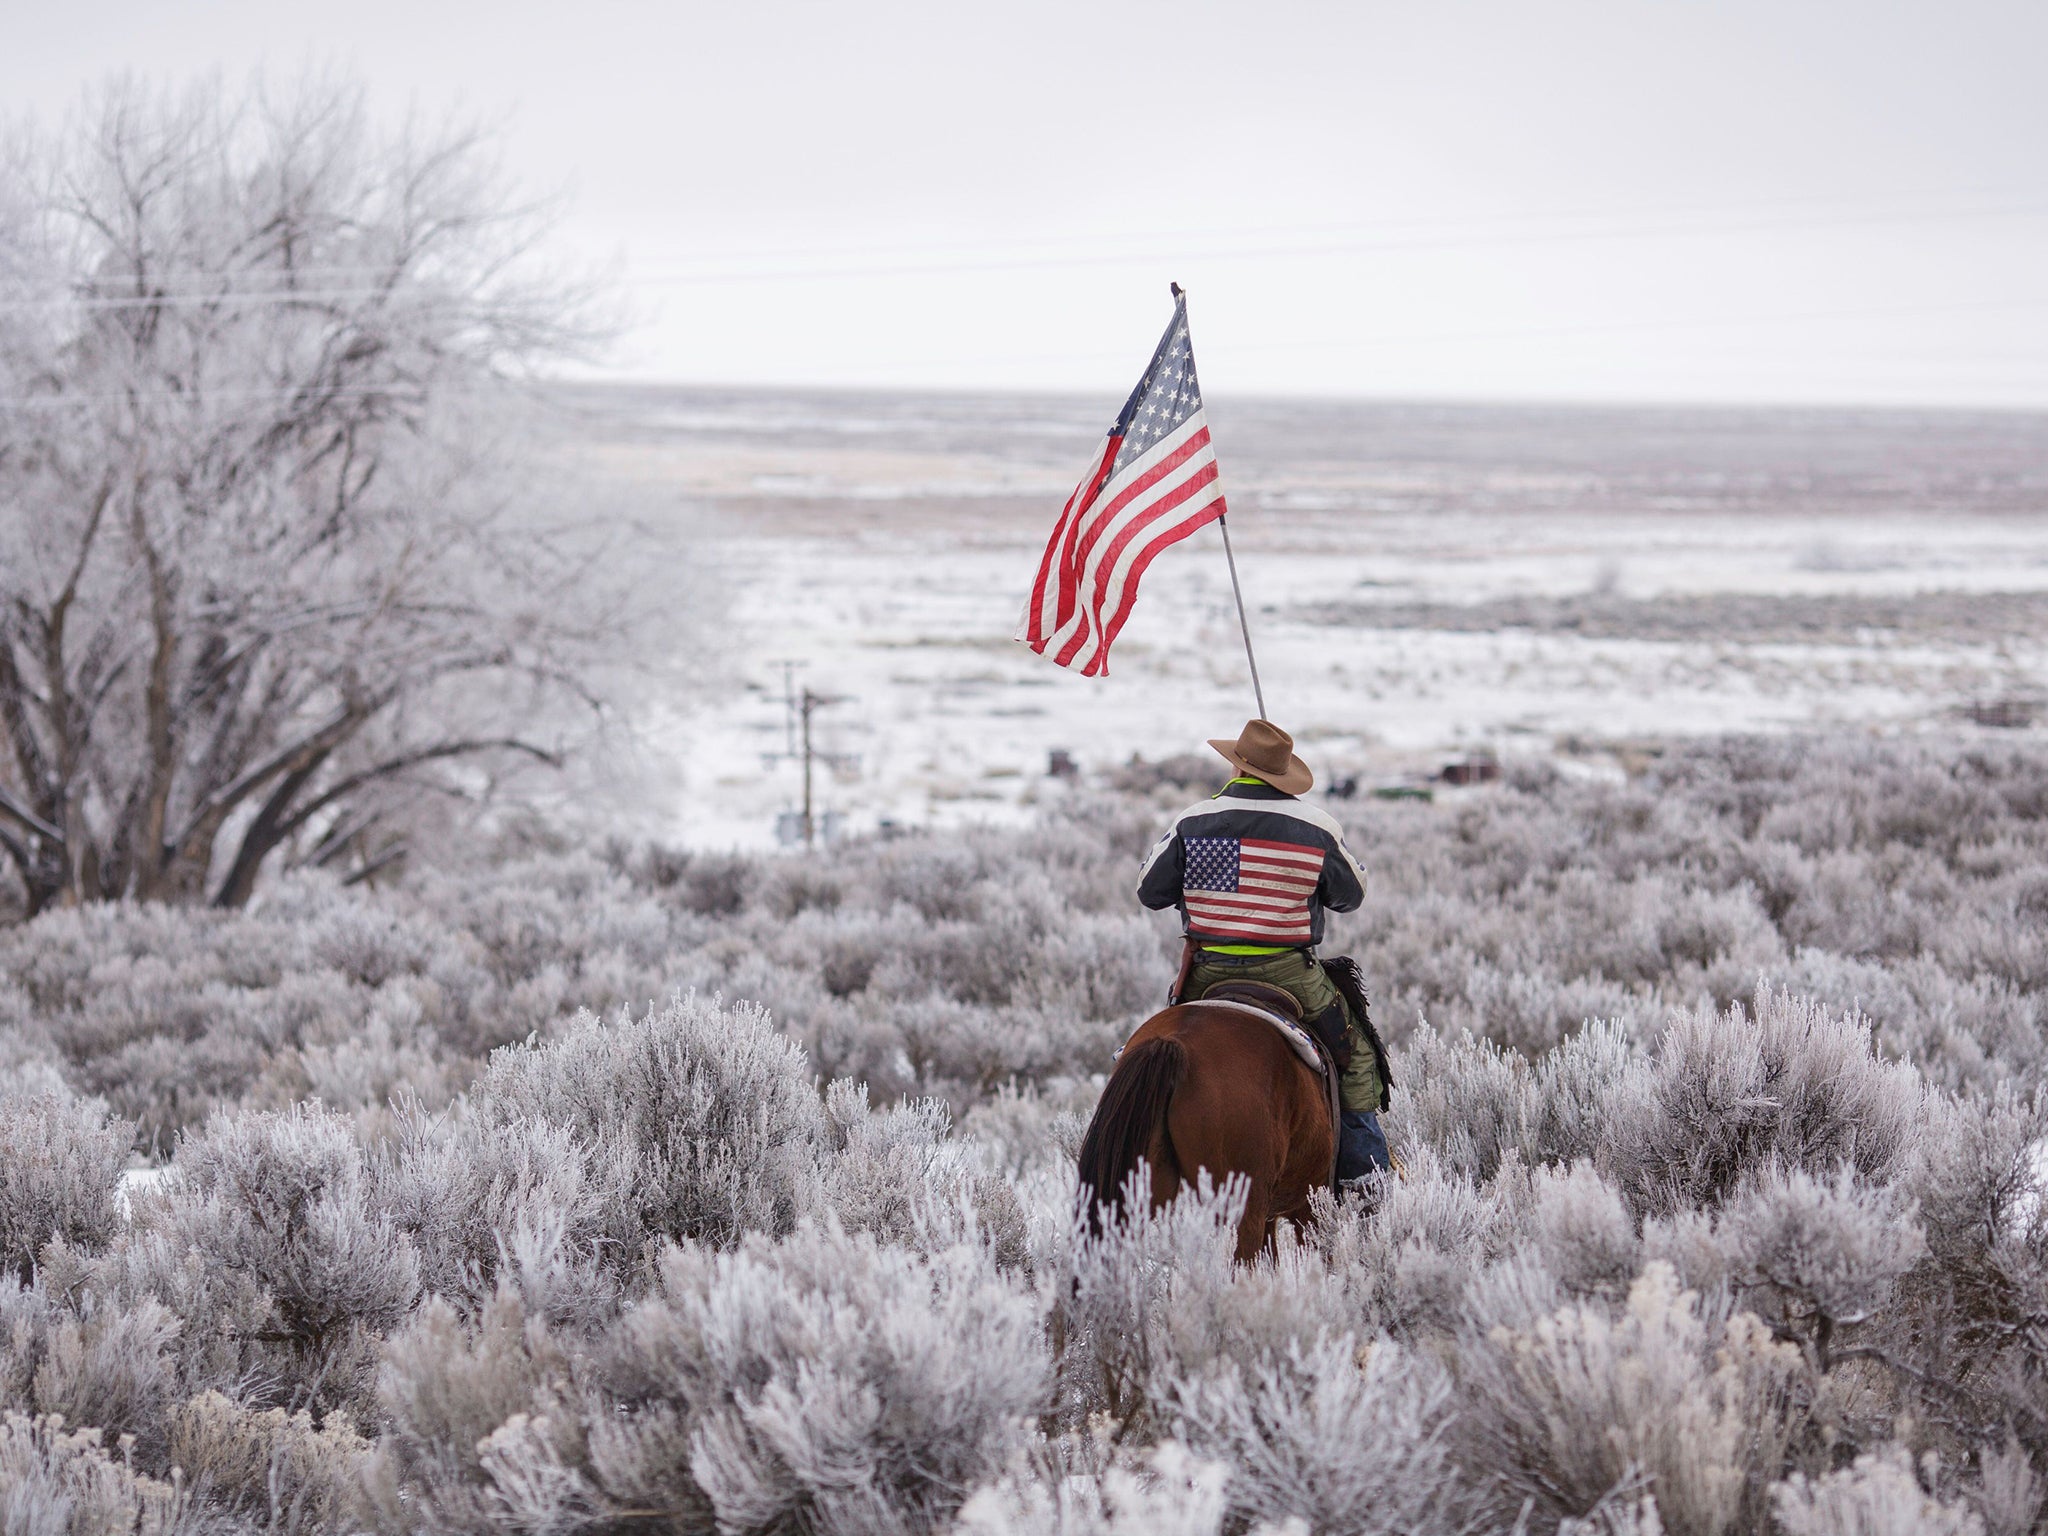 An activist rides through scrub near the Malheur National Wildlife Refuge headquarters during the 41-day occupation